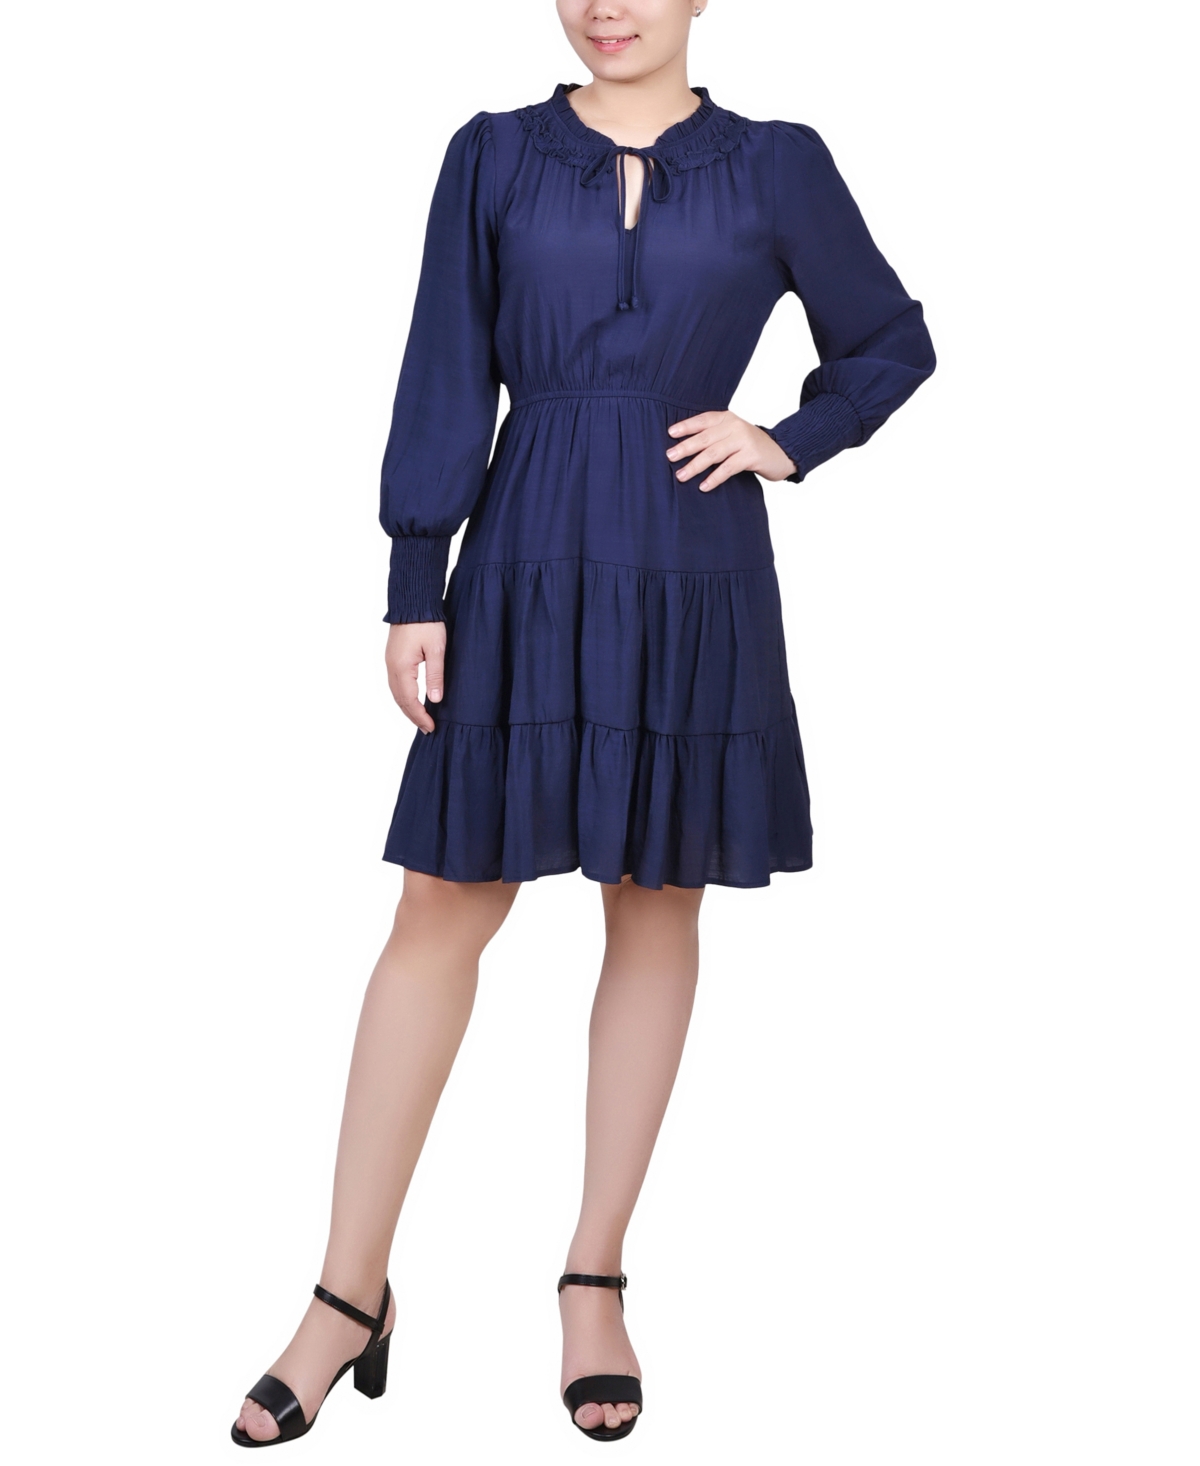 Petite Long Sleeve Tiered Dress with Ruffled Neck - Navy